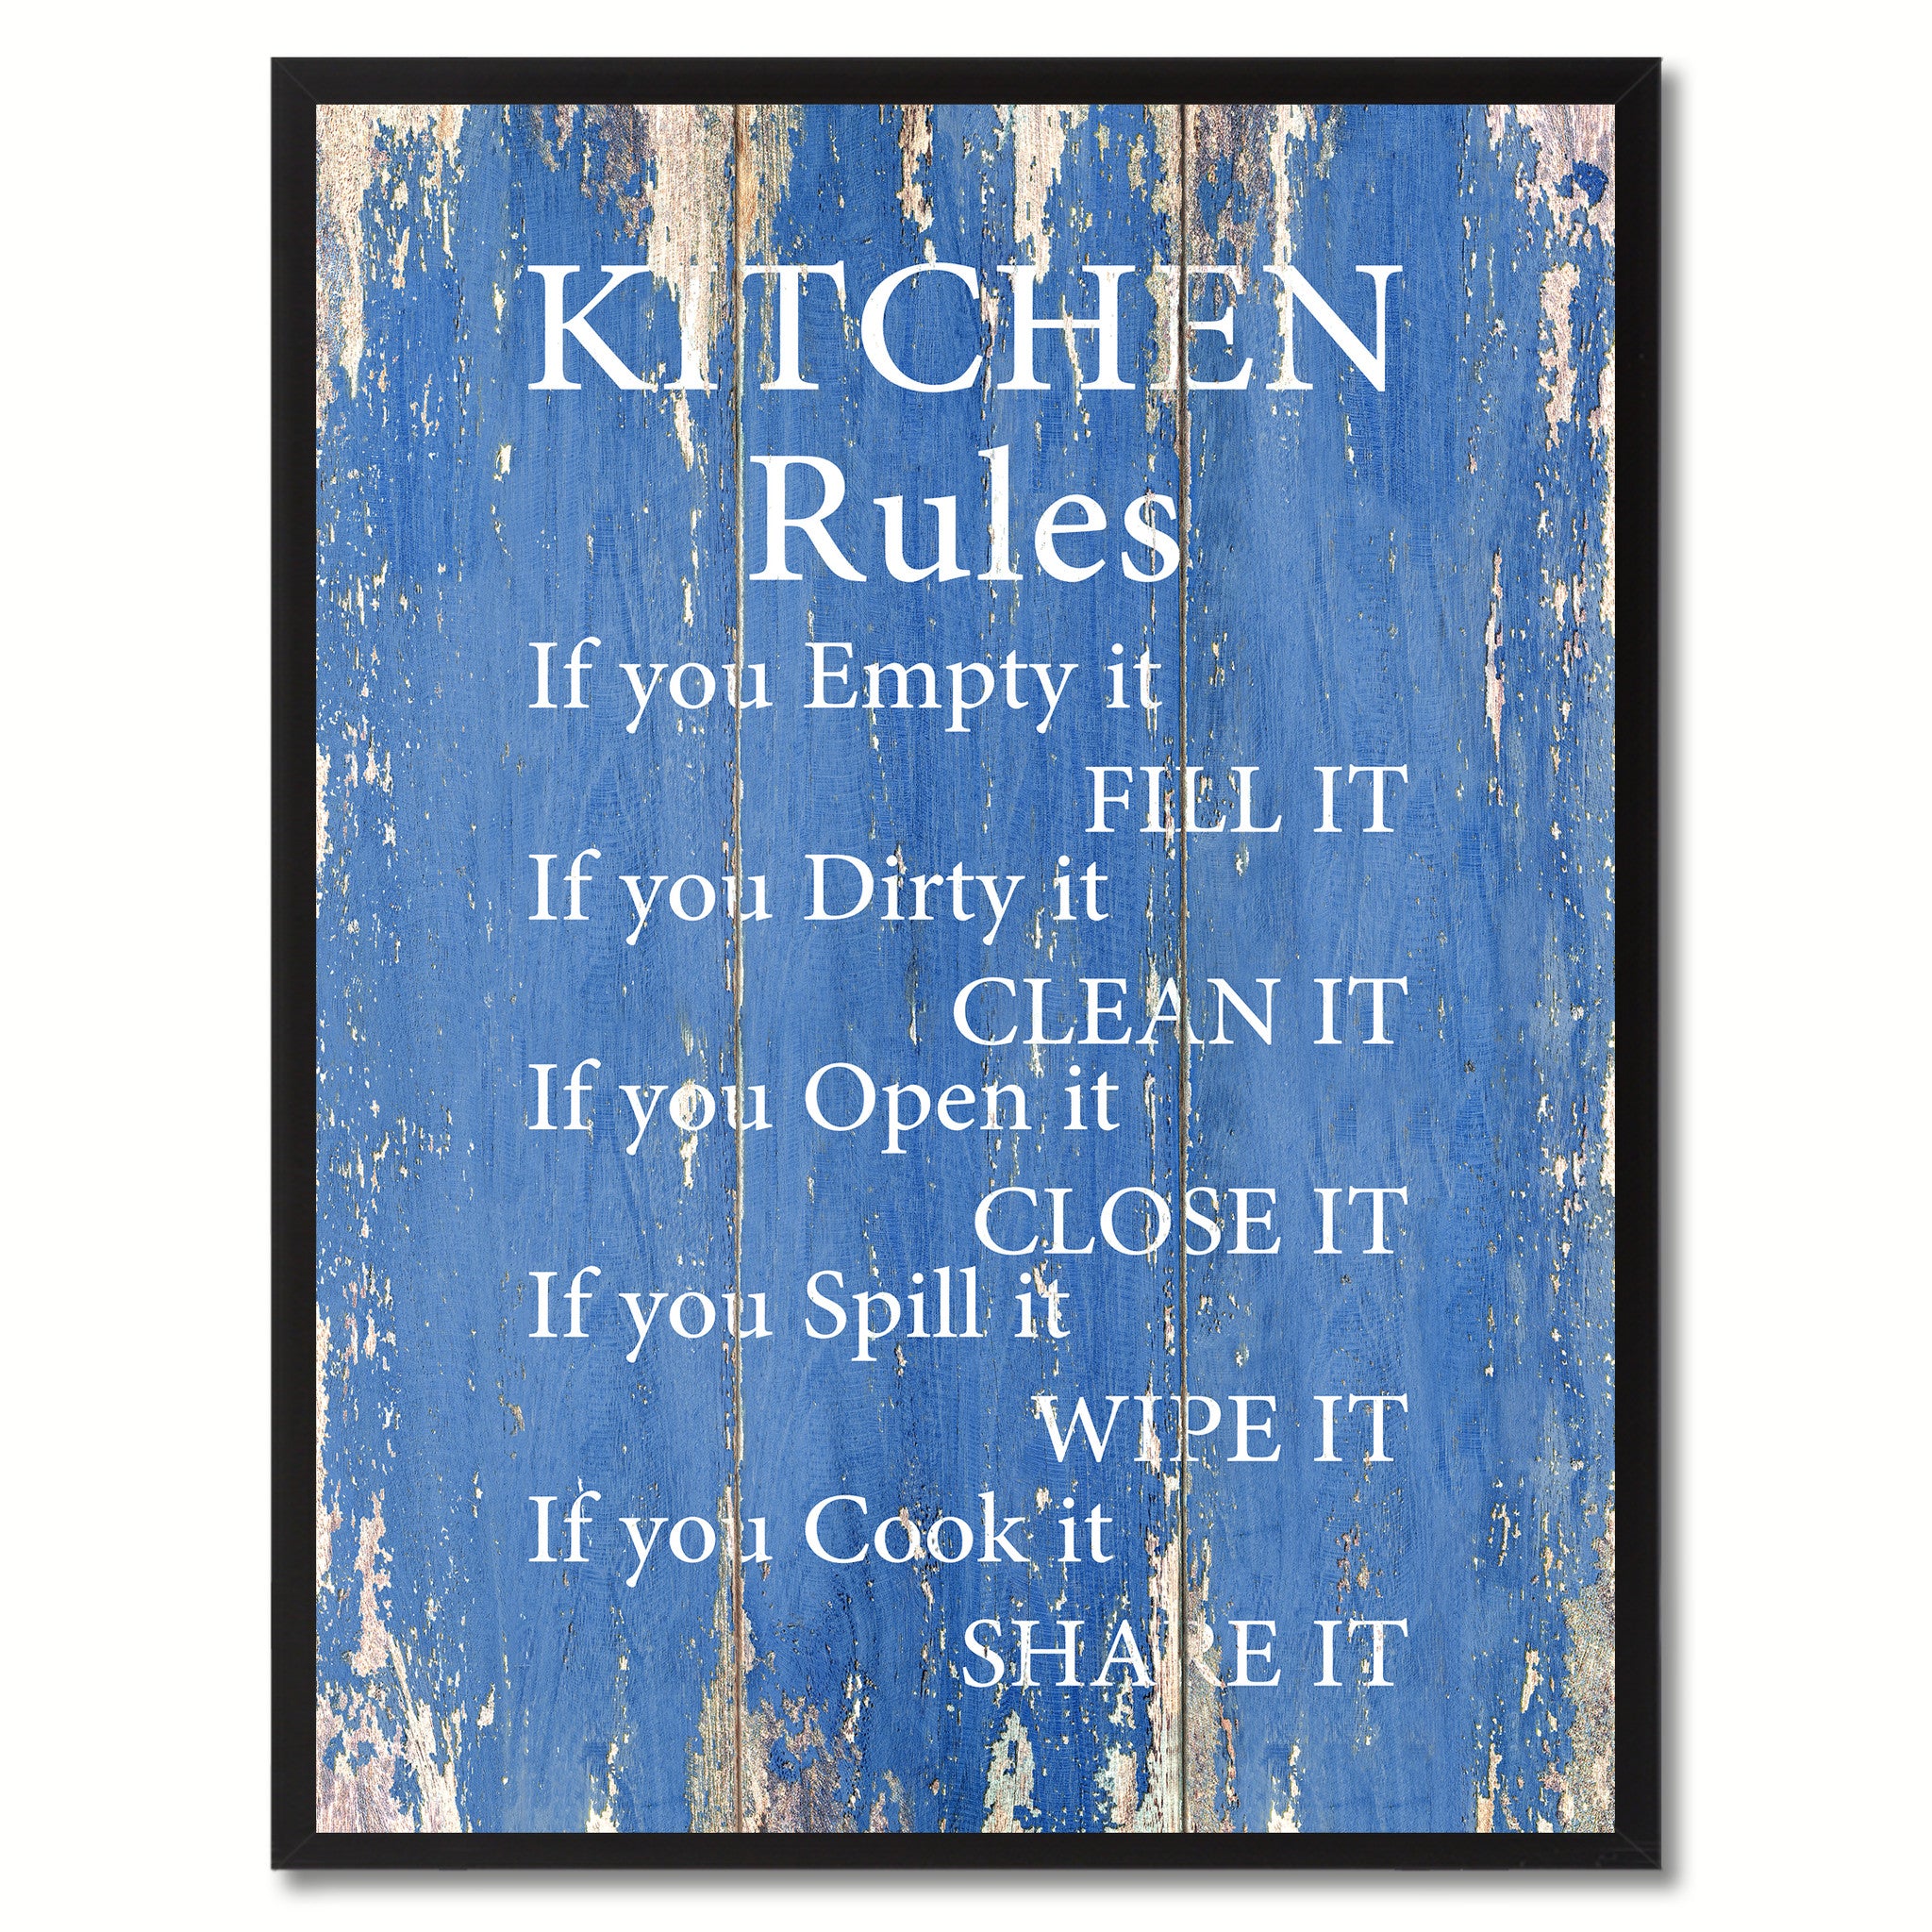 Kitchen Rules Saying Canvas Print, Black Picture Frame Home Decor Wall Art Gifts